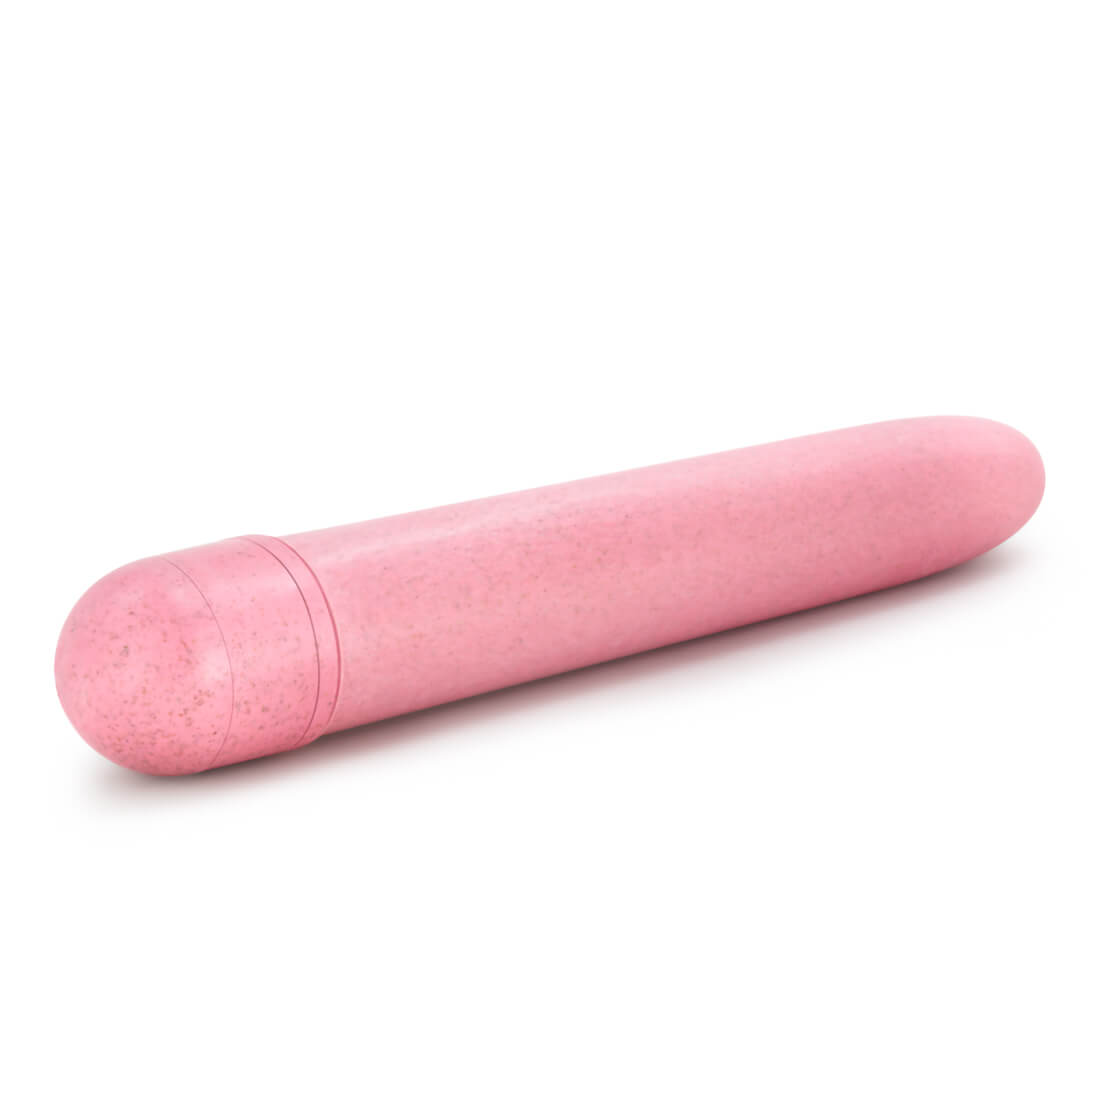 Gaia Eco Biodegradable Vibrator in coral color - The Bigger O - online sex toy shop USA, Canada & UK shipping available